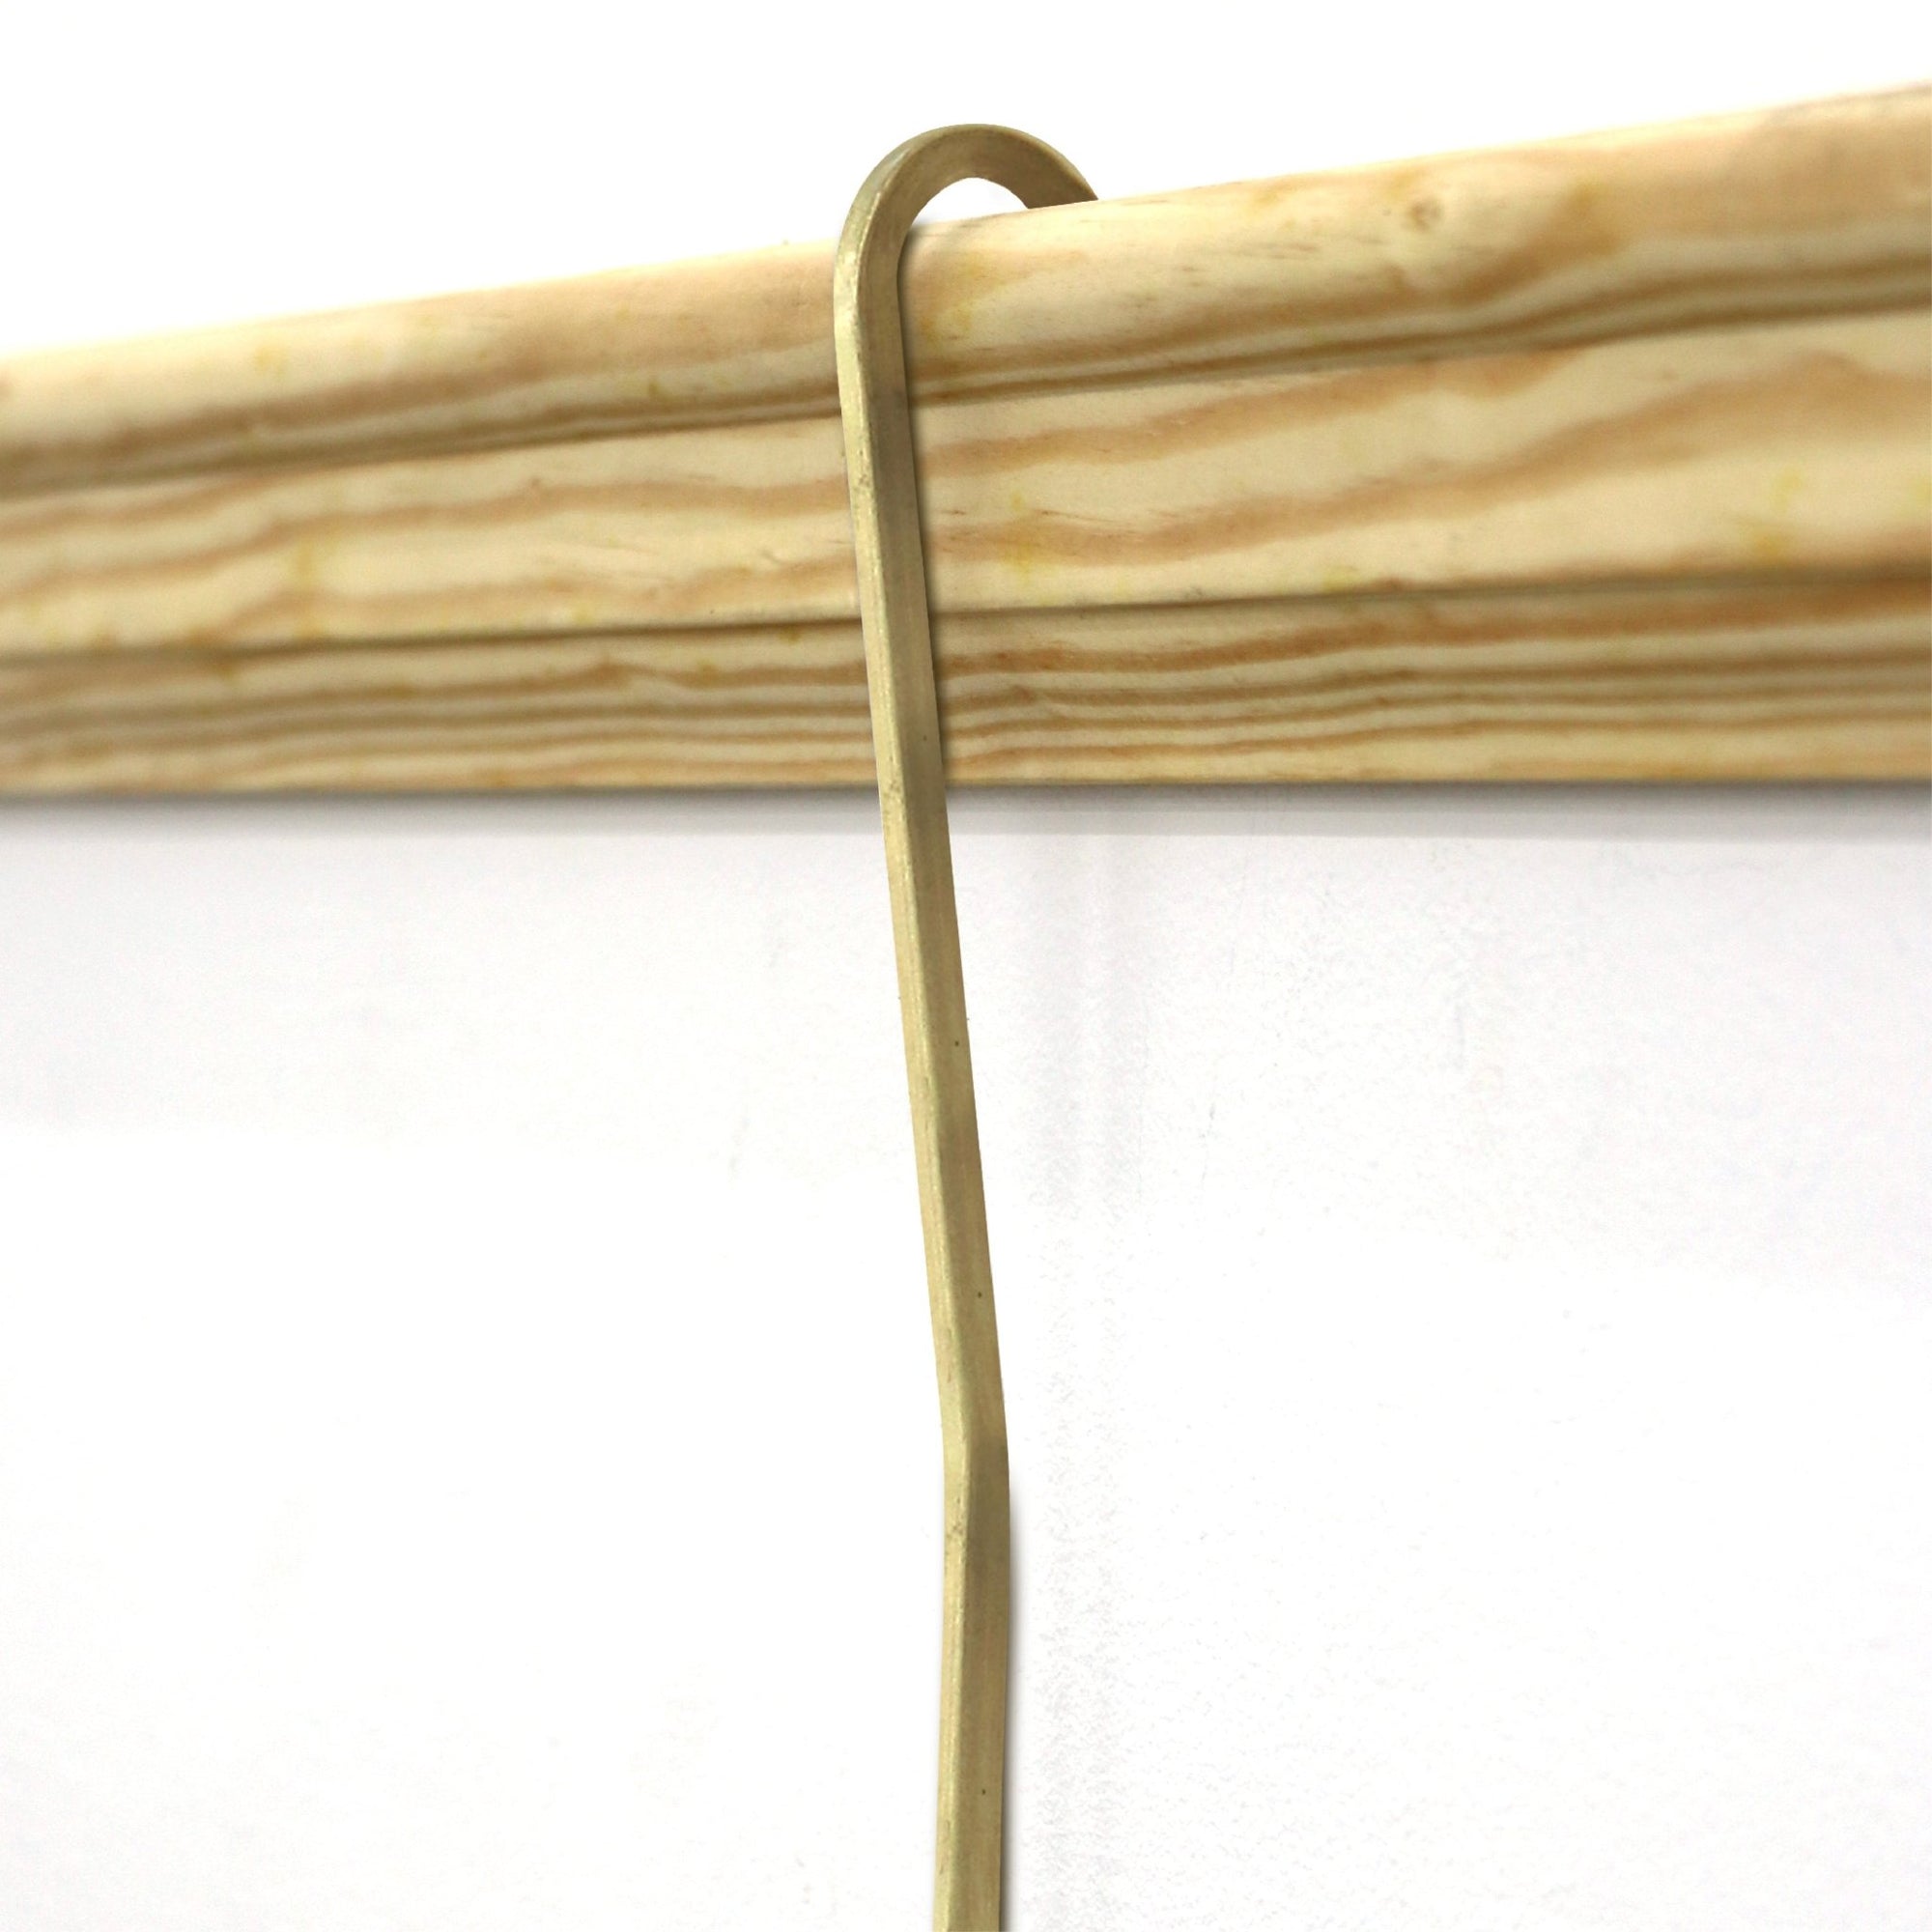 Brass Gallery Rod for Picture Rail Molding - 5 foot Rod for Hanging Multiple Frames and Photo Wall Collage - BGS-OGROD - Picture Hang Solutions